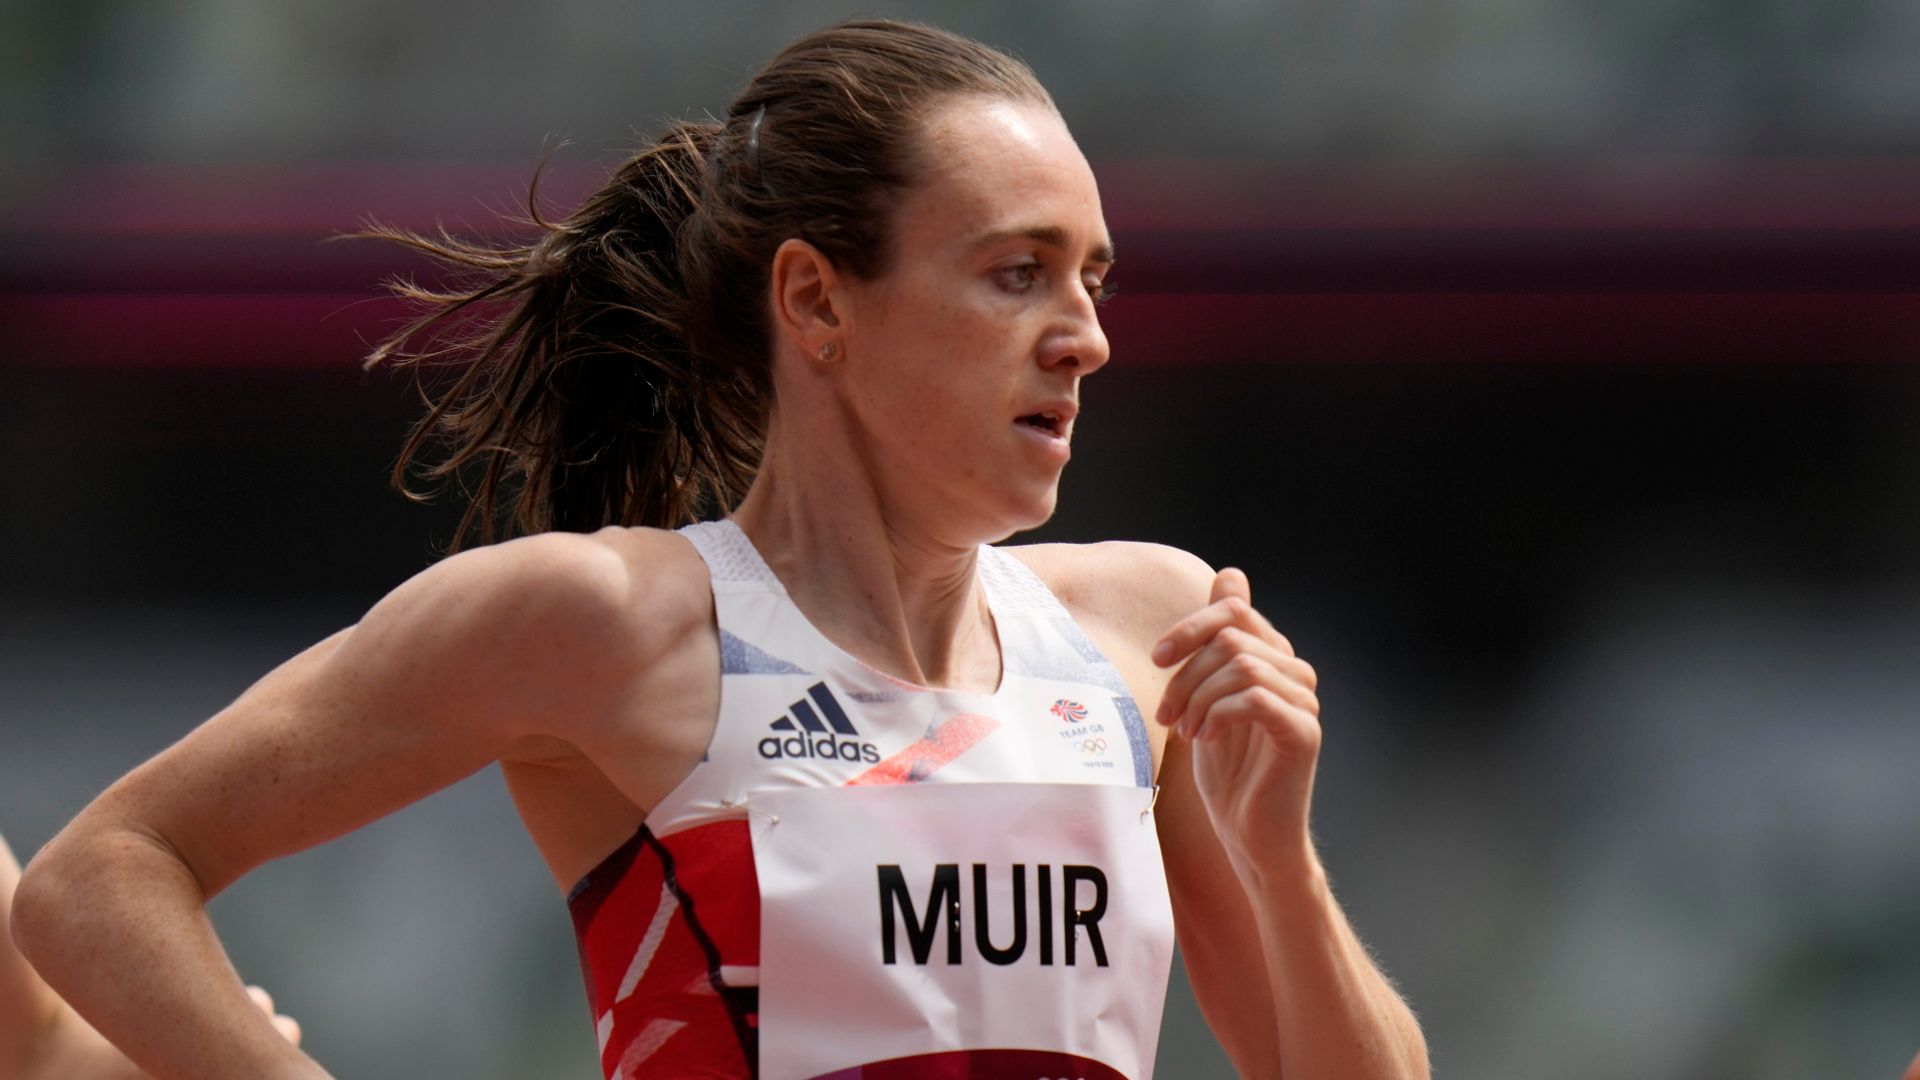 Muir excited for 1500m semi-final after easy heat